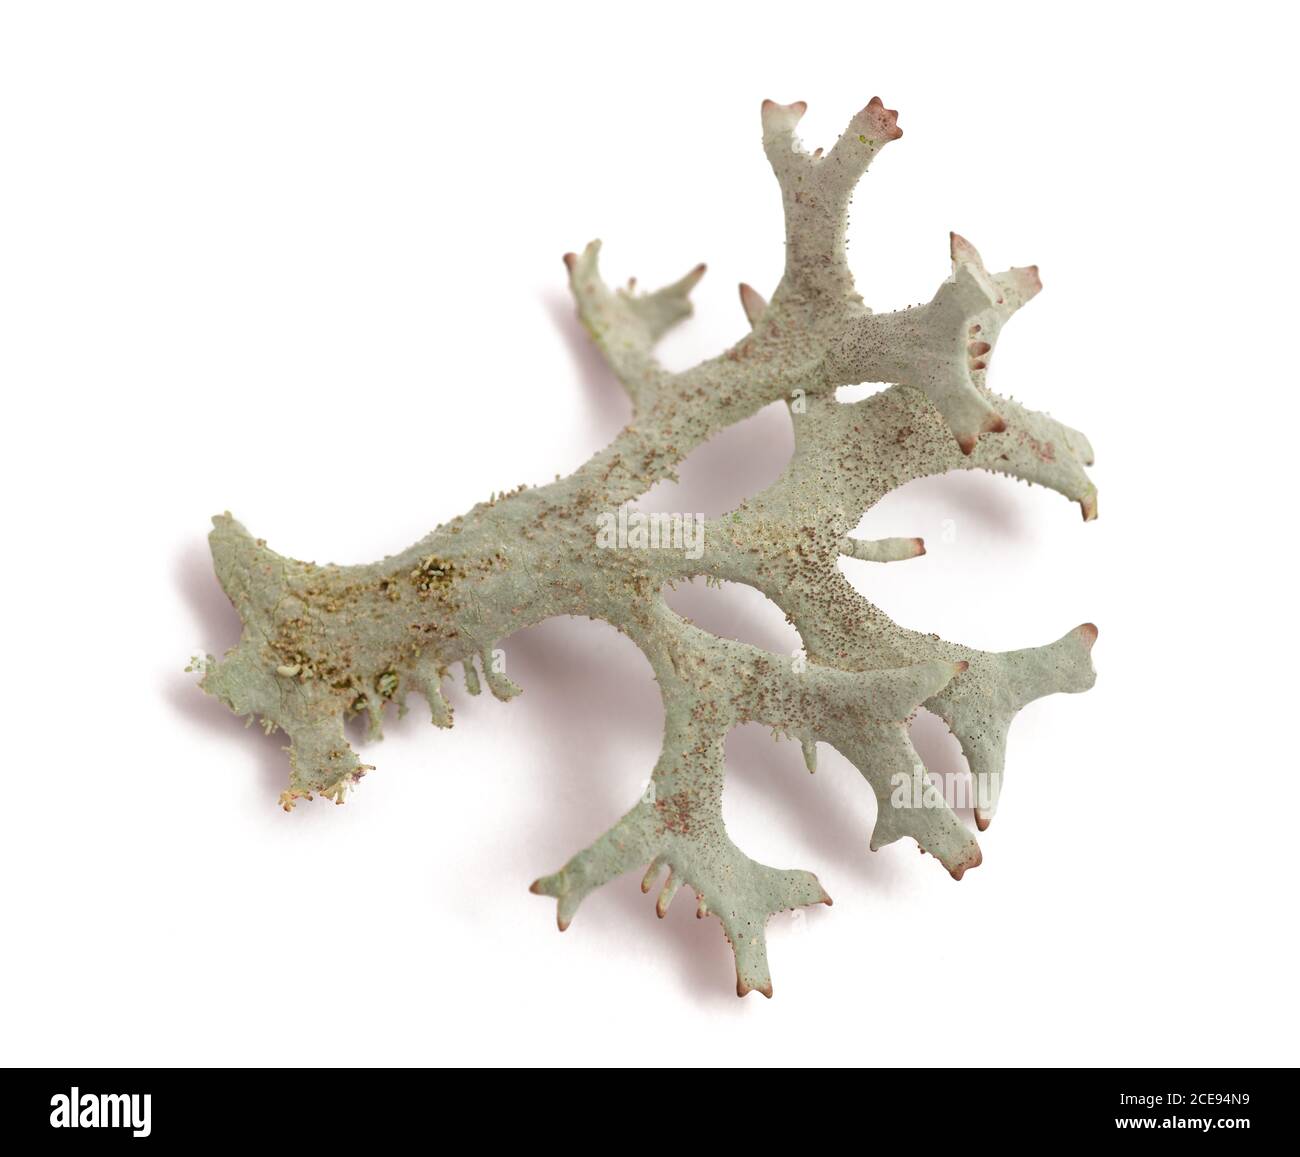 Cetraria islandica (iceland moss) isolated on white background Stock Photo